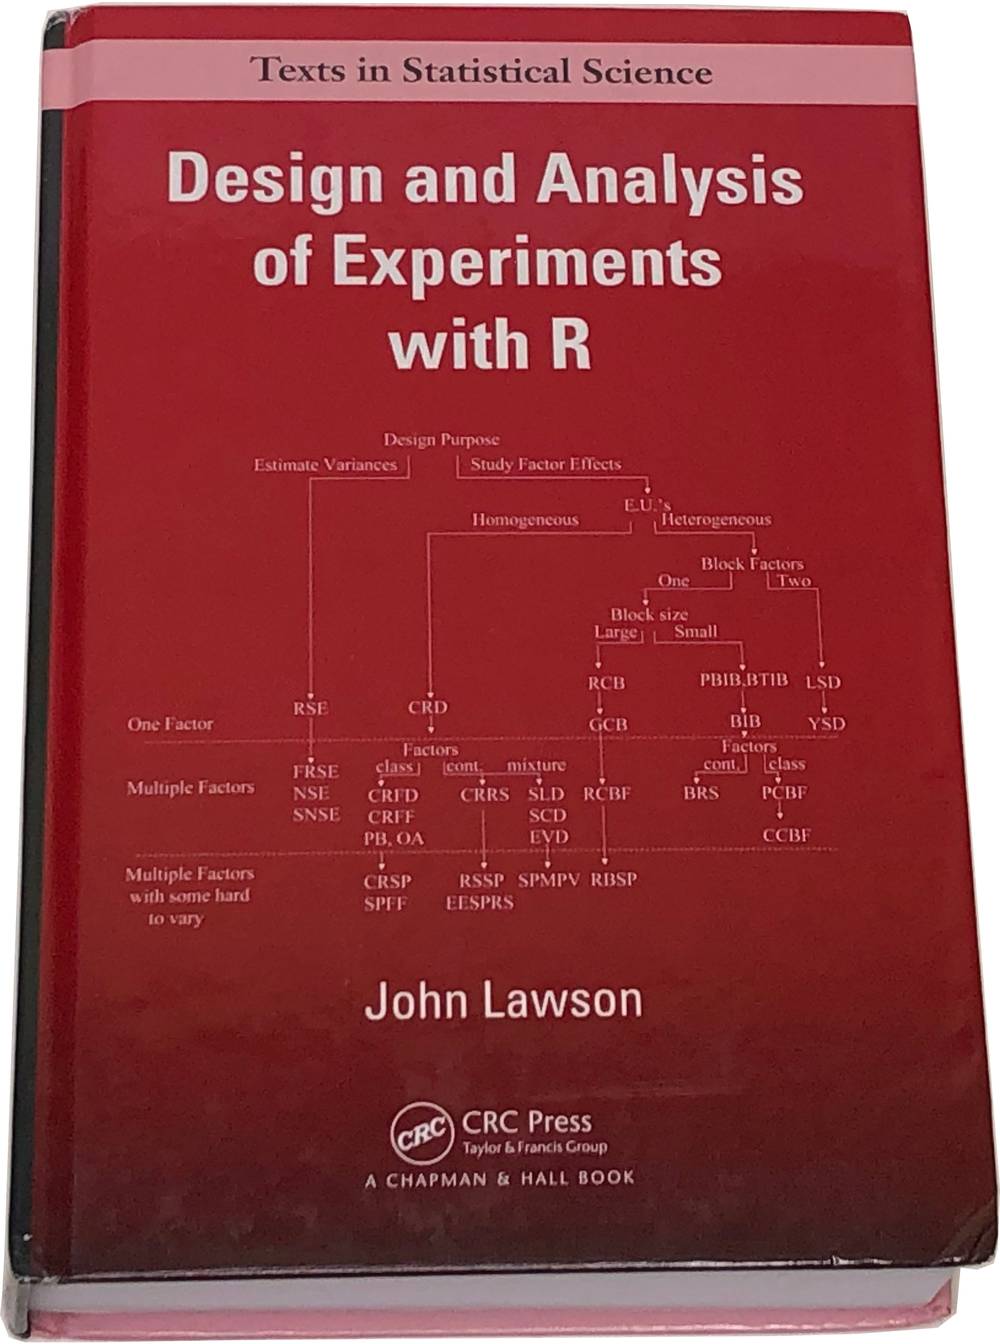 Book image of Design and Analysis of Experiments with R.